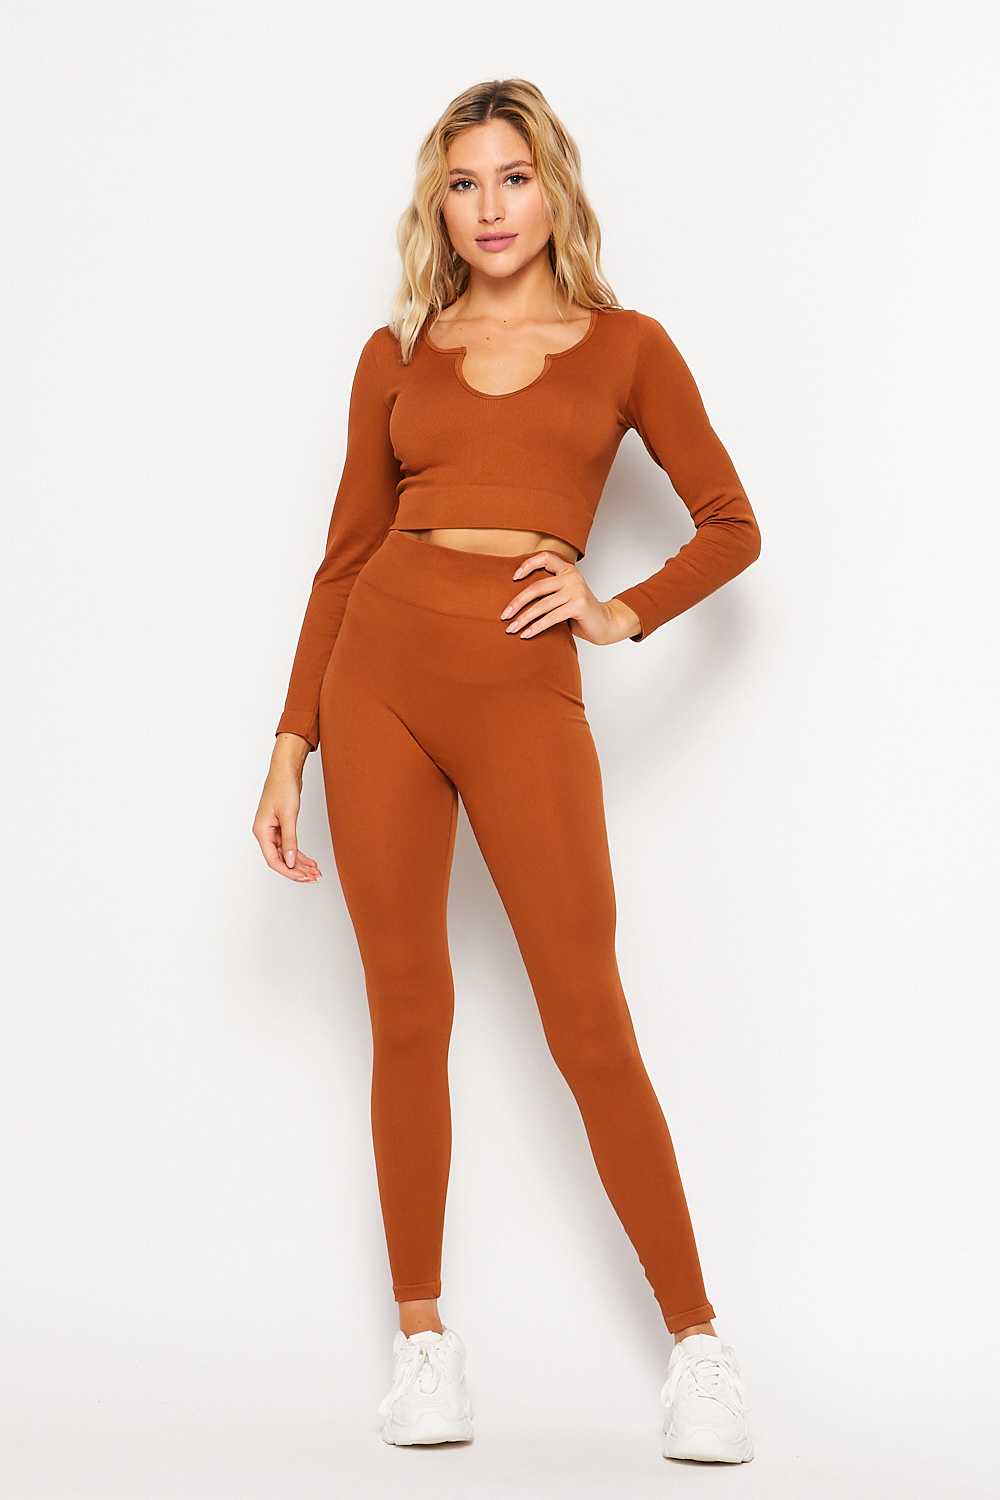 How It Ends Double Layer Cropped Legging Set - Orange